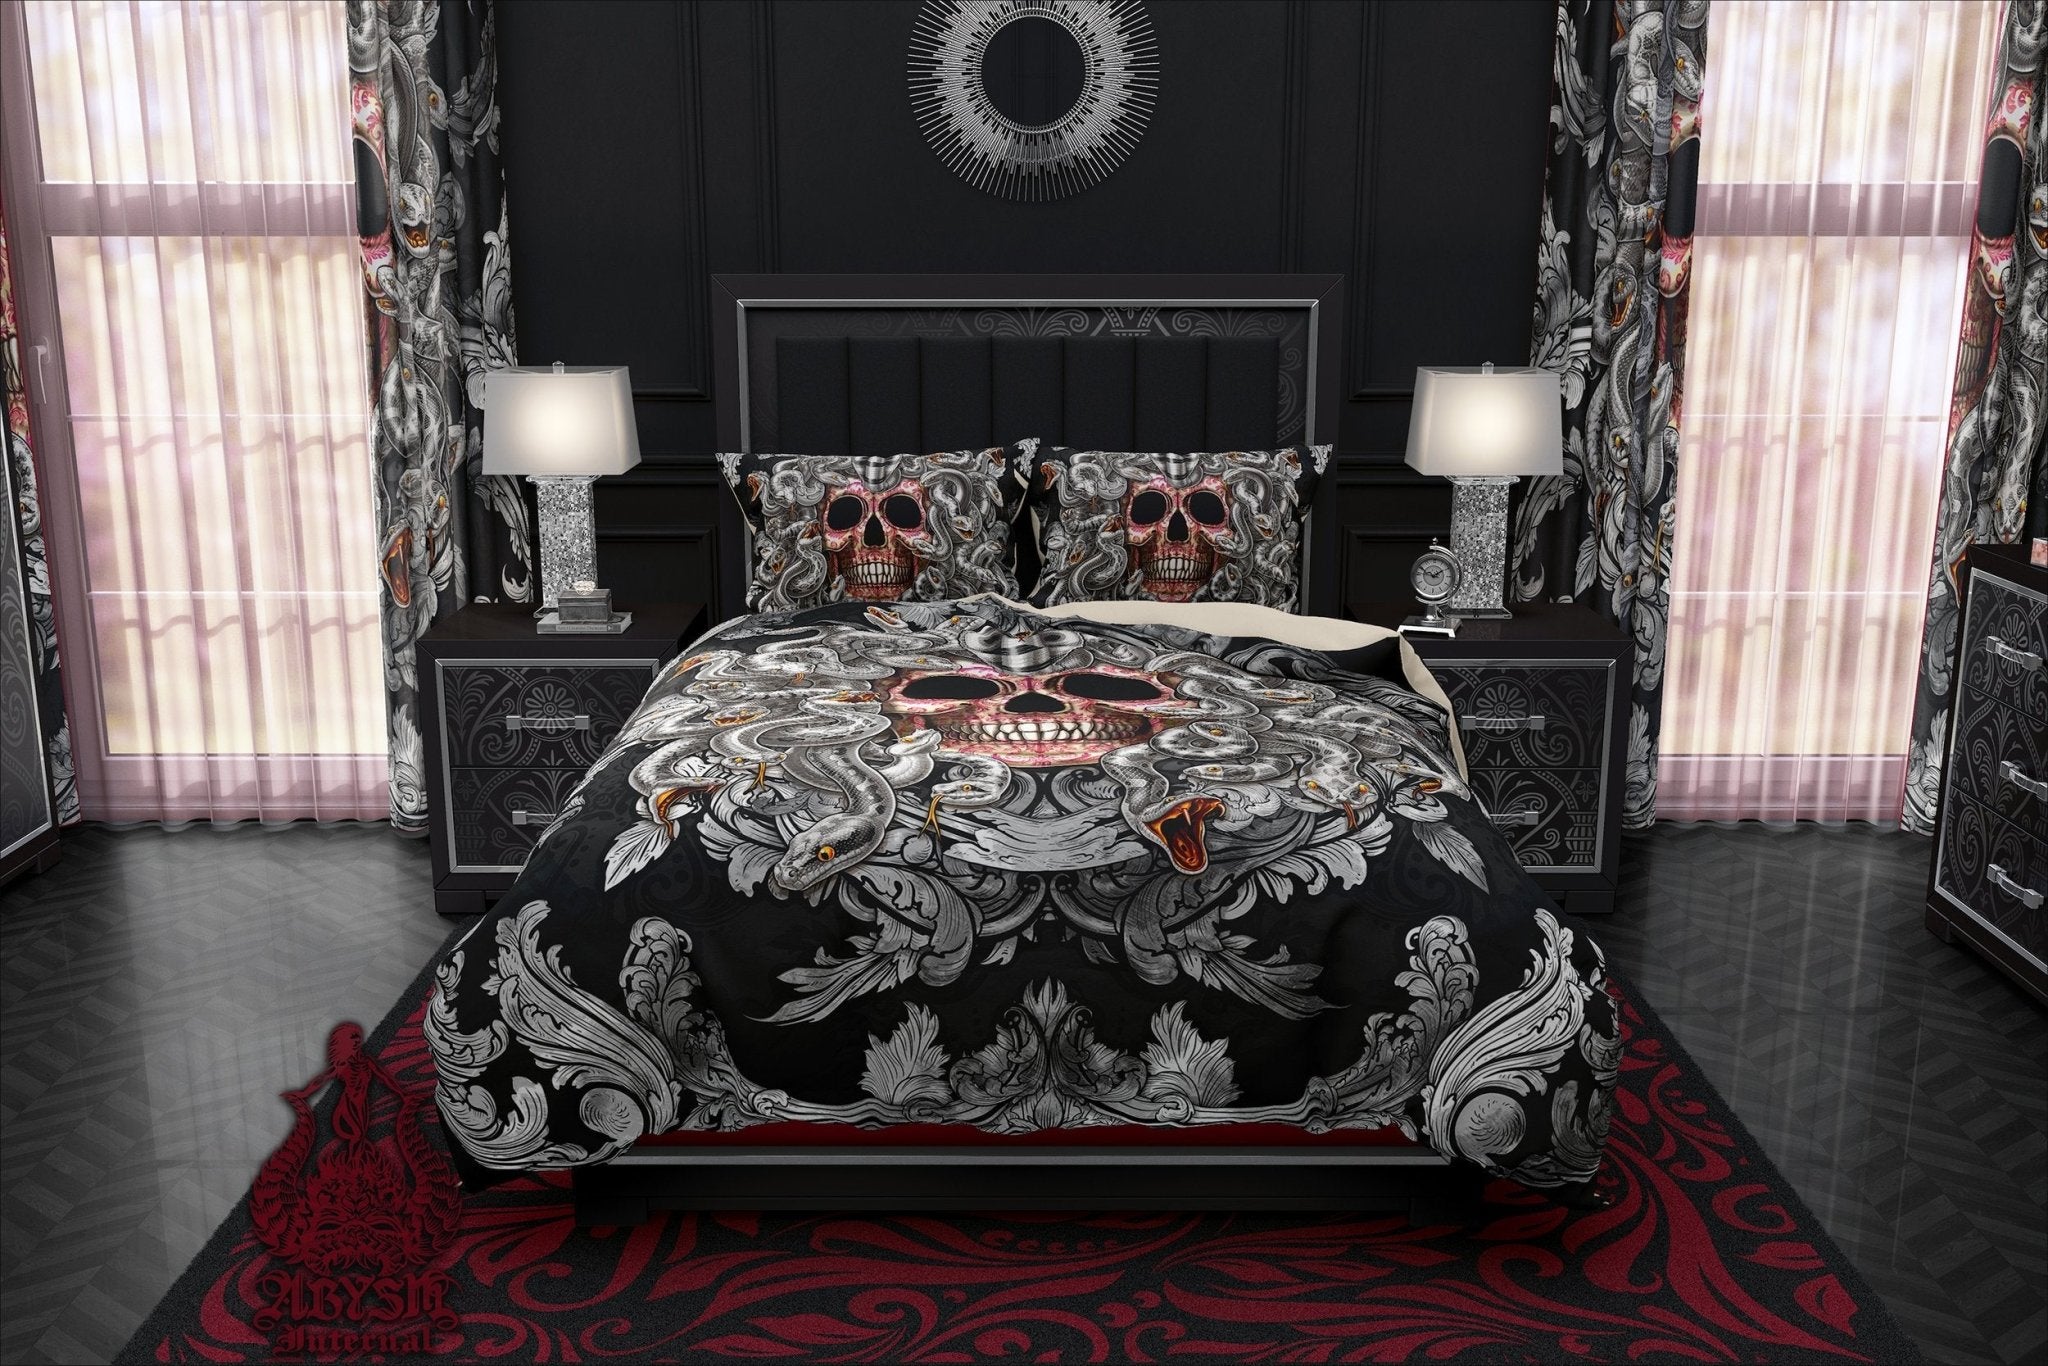 Skull Bedding Set, Comforter and Duvet, Victorian Goth Bed Cover and Bedroom Decor, King, Queen and Twin Size - Silver Medusa - Abysm Internal